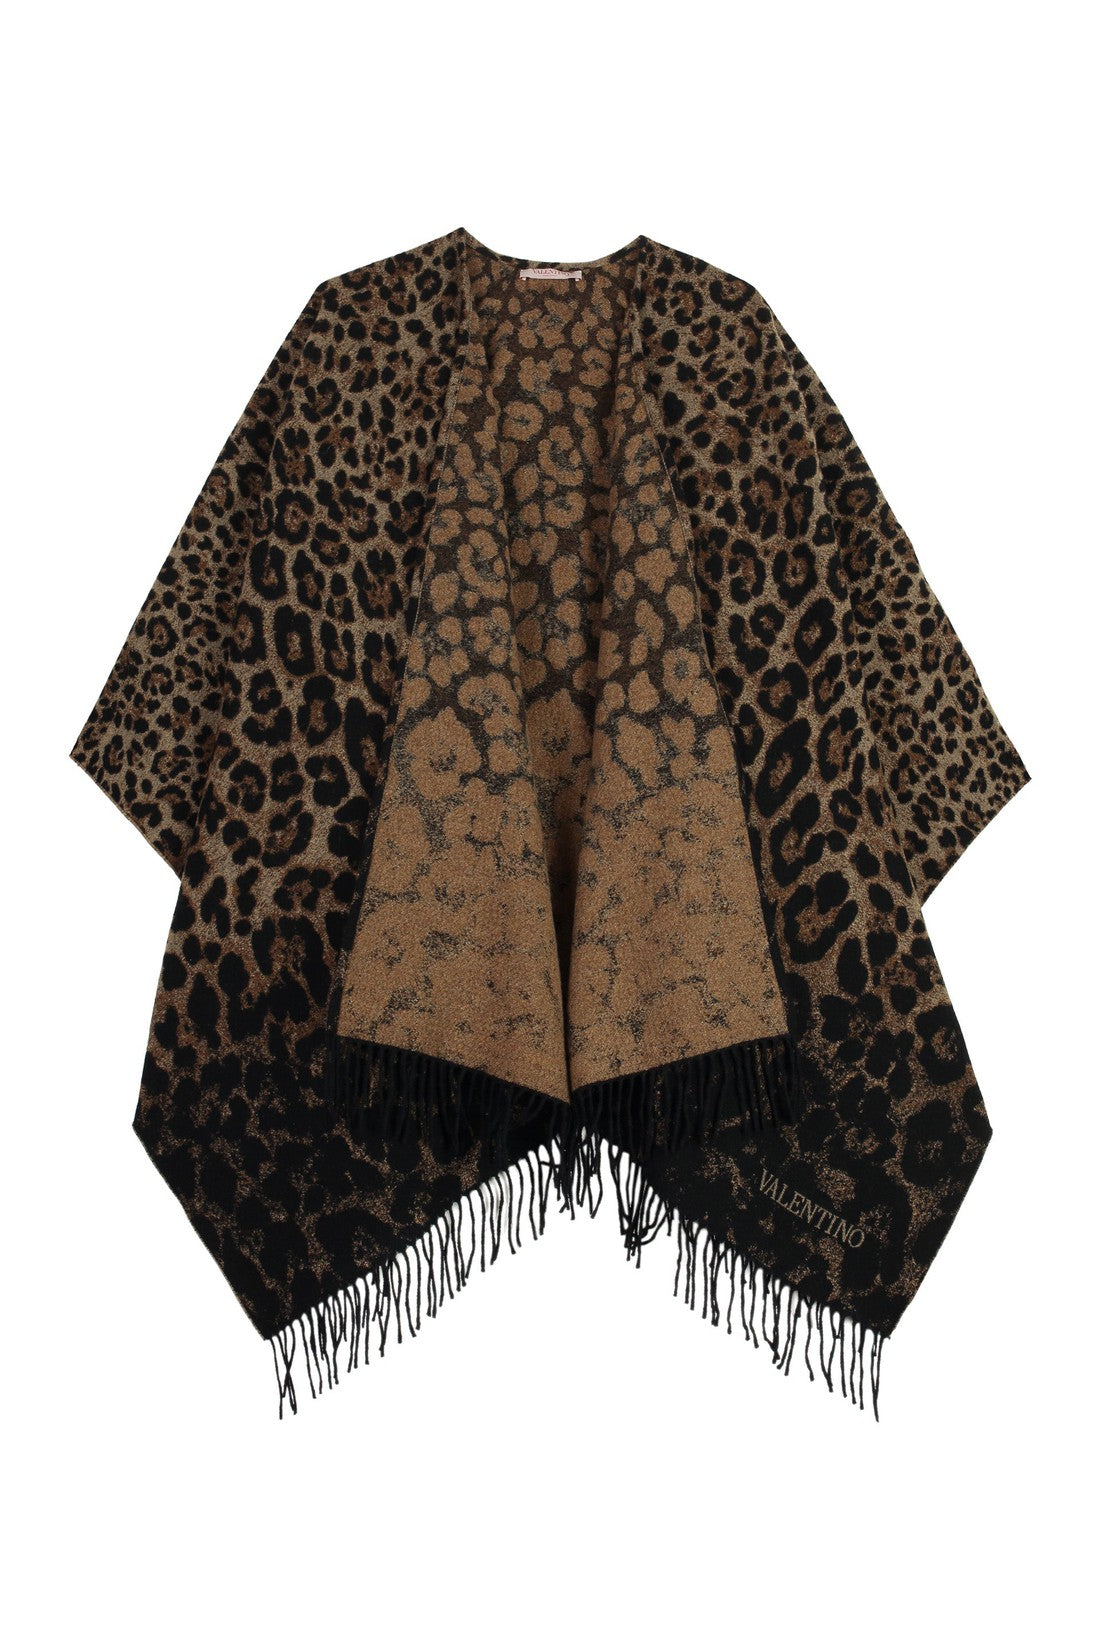 Valentino-OUTLET-SALE-Wool and cashmere cape-ARCHIVIST